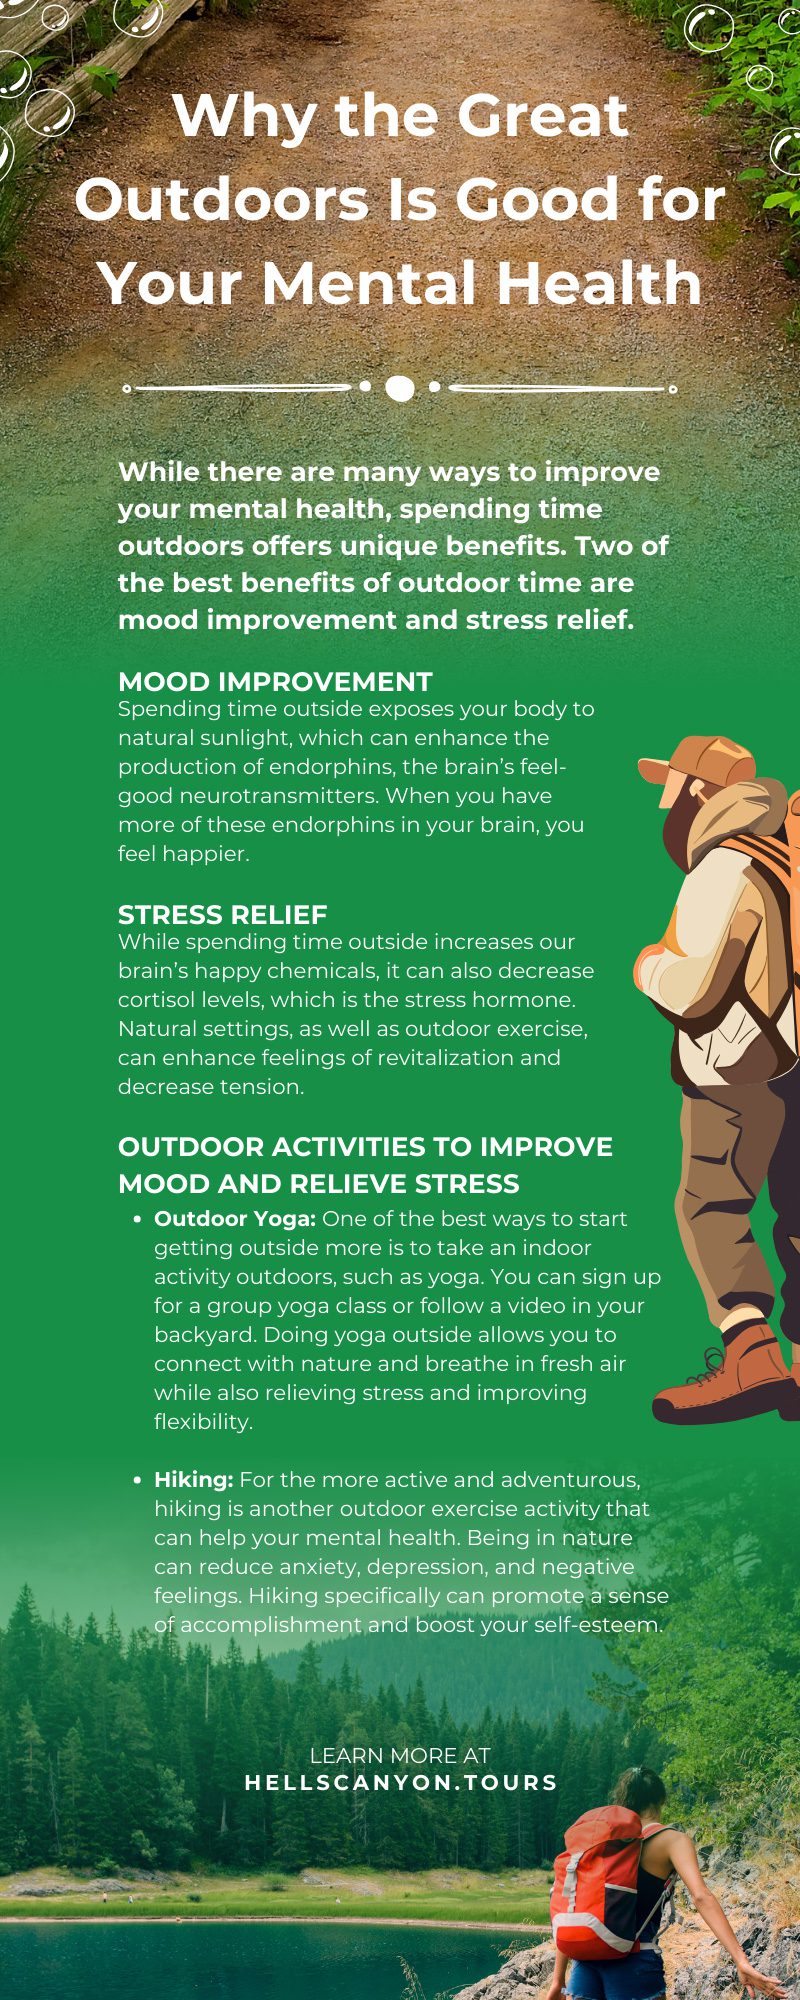 Why the Great Outdoors Is Good for Your Mental Health